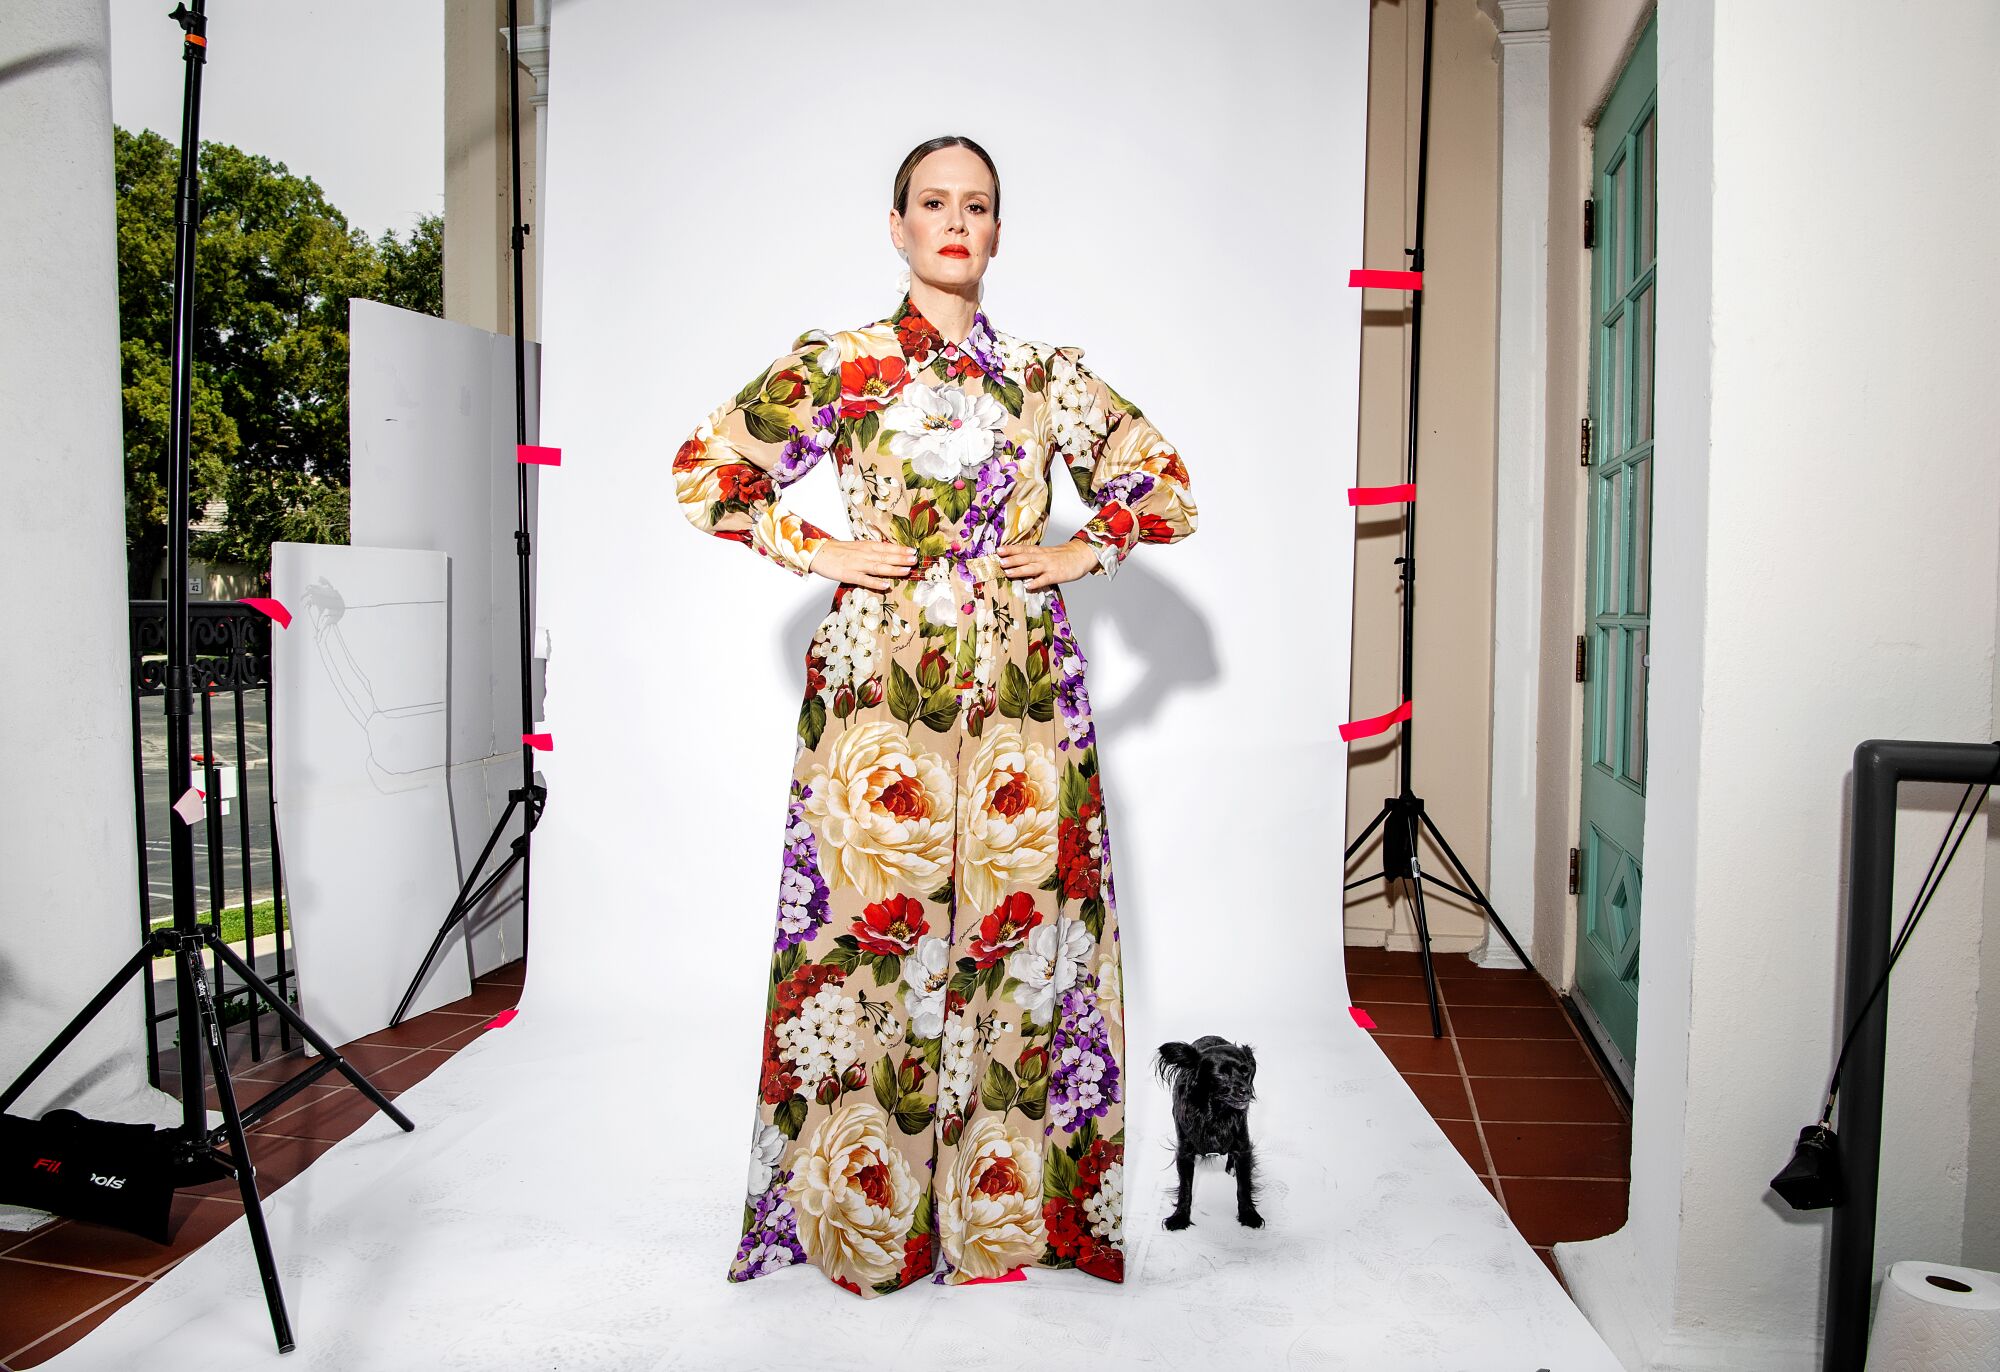 Aug. 17: Sarah Paulson stands with her hands on her hips while wearing a long flowered gown with a dog beside her